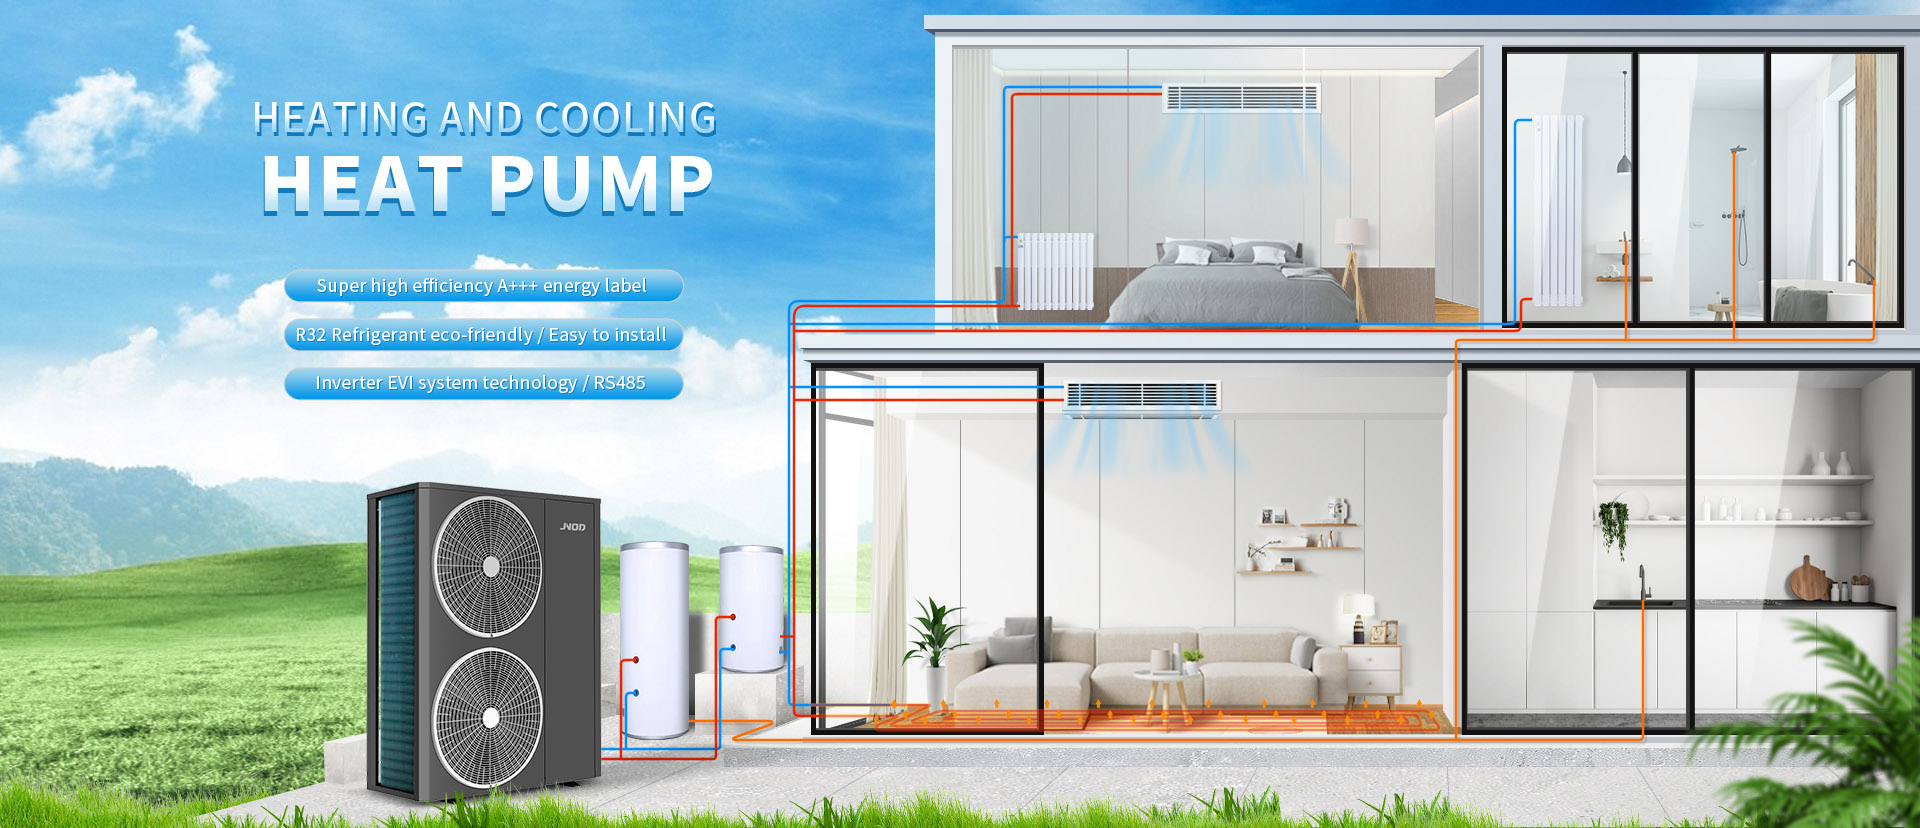 Eco Friendly Heating And Cooling Heat Pump